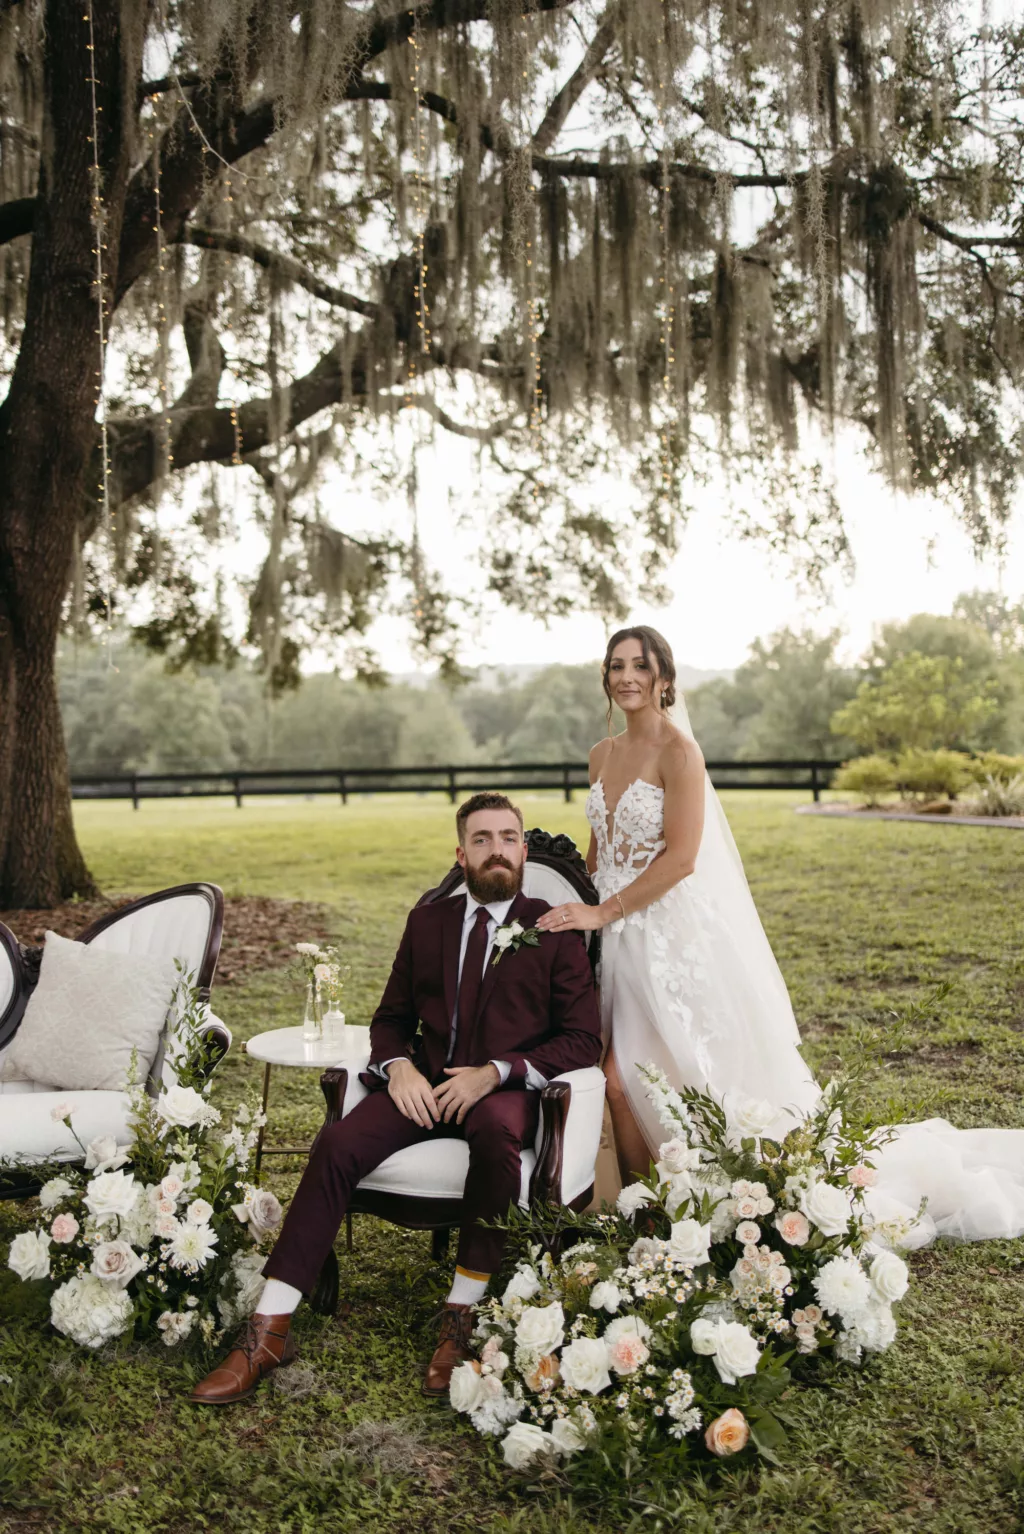 Bride and Groom Just Married Wedding Portrait | Wedding Reception Flower Arrangement Decor Inspiration | Pink Roses, White Hydrangeas, Feverfew Daisies, Stock Flowers, Carnations, and Greenery | Tampa Planner The Olive Tree Weddings | Venue La Hacienda on Snow Hill